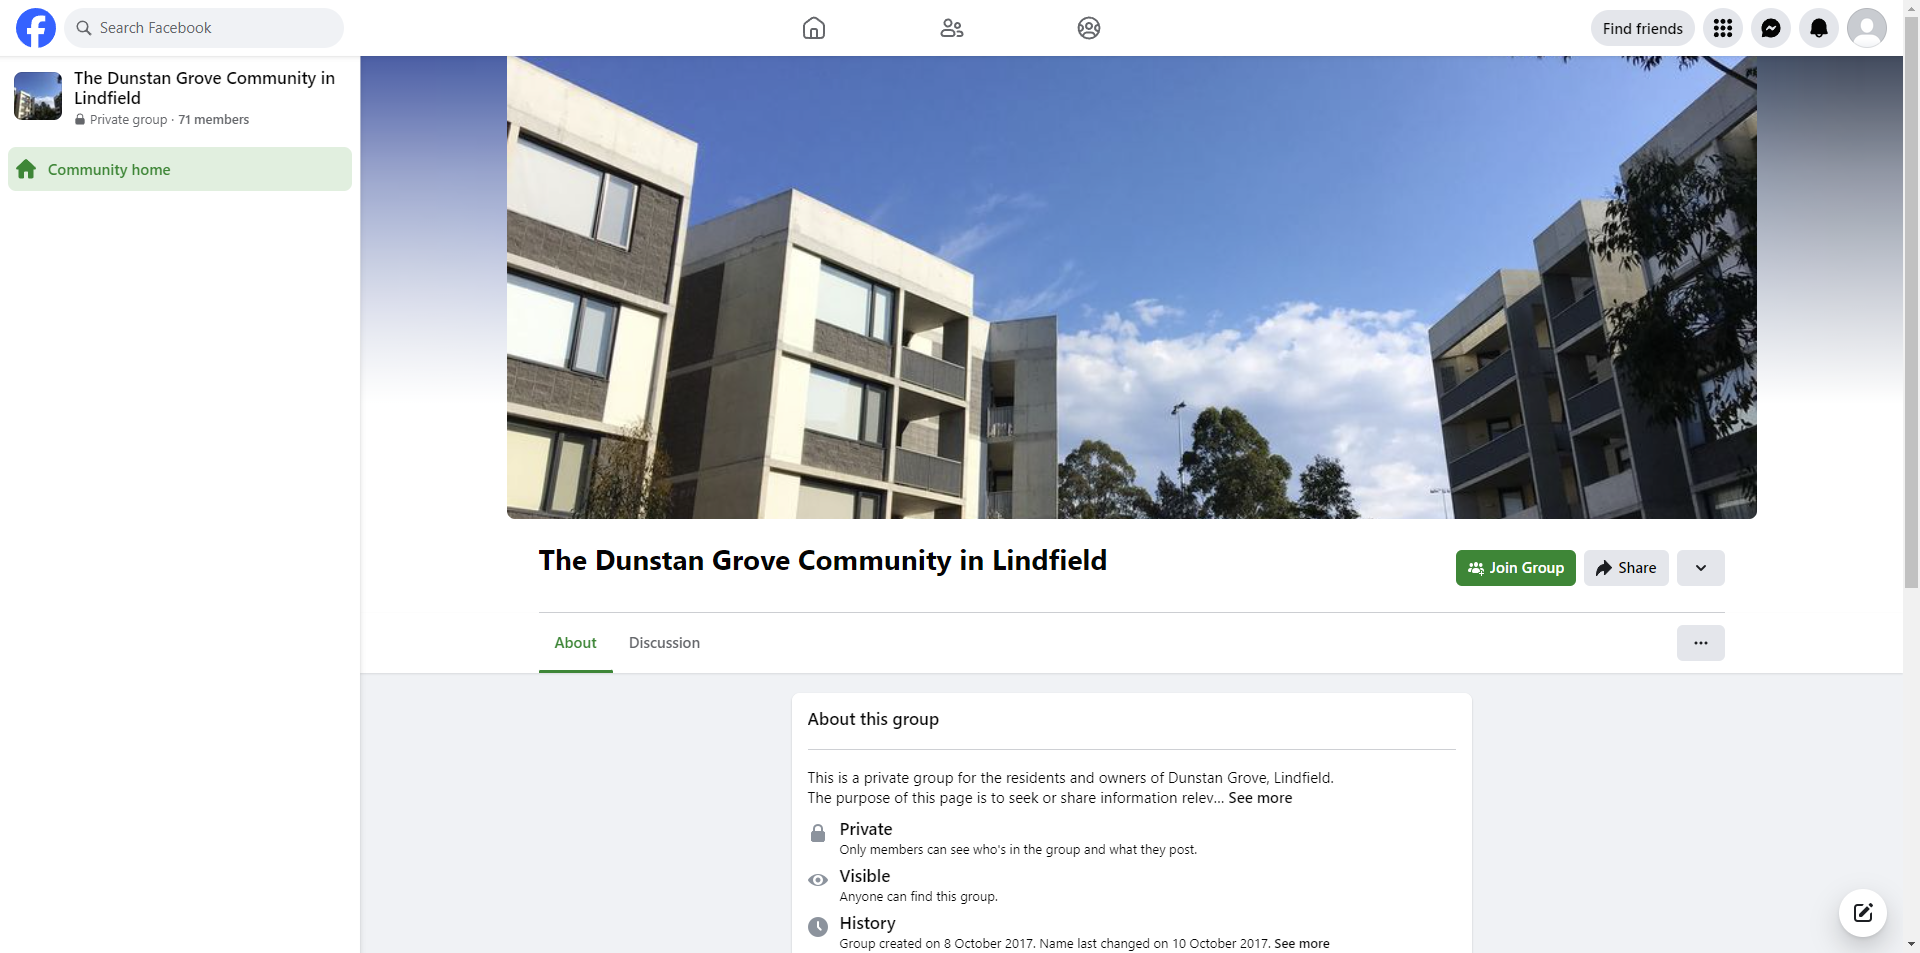 The Dustan Grove Community in Lindfield